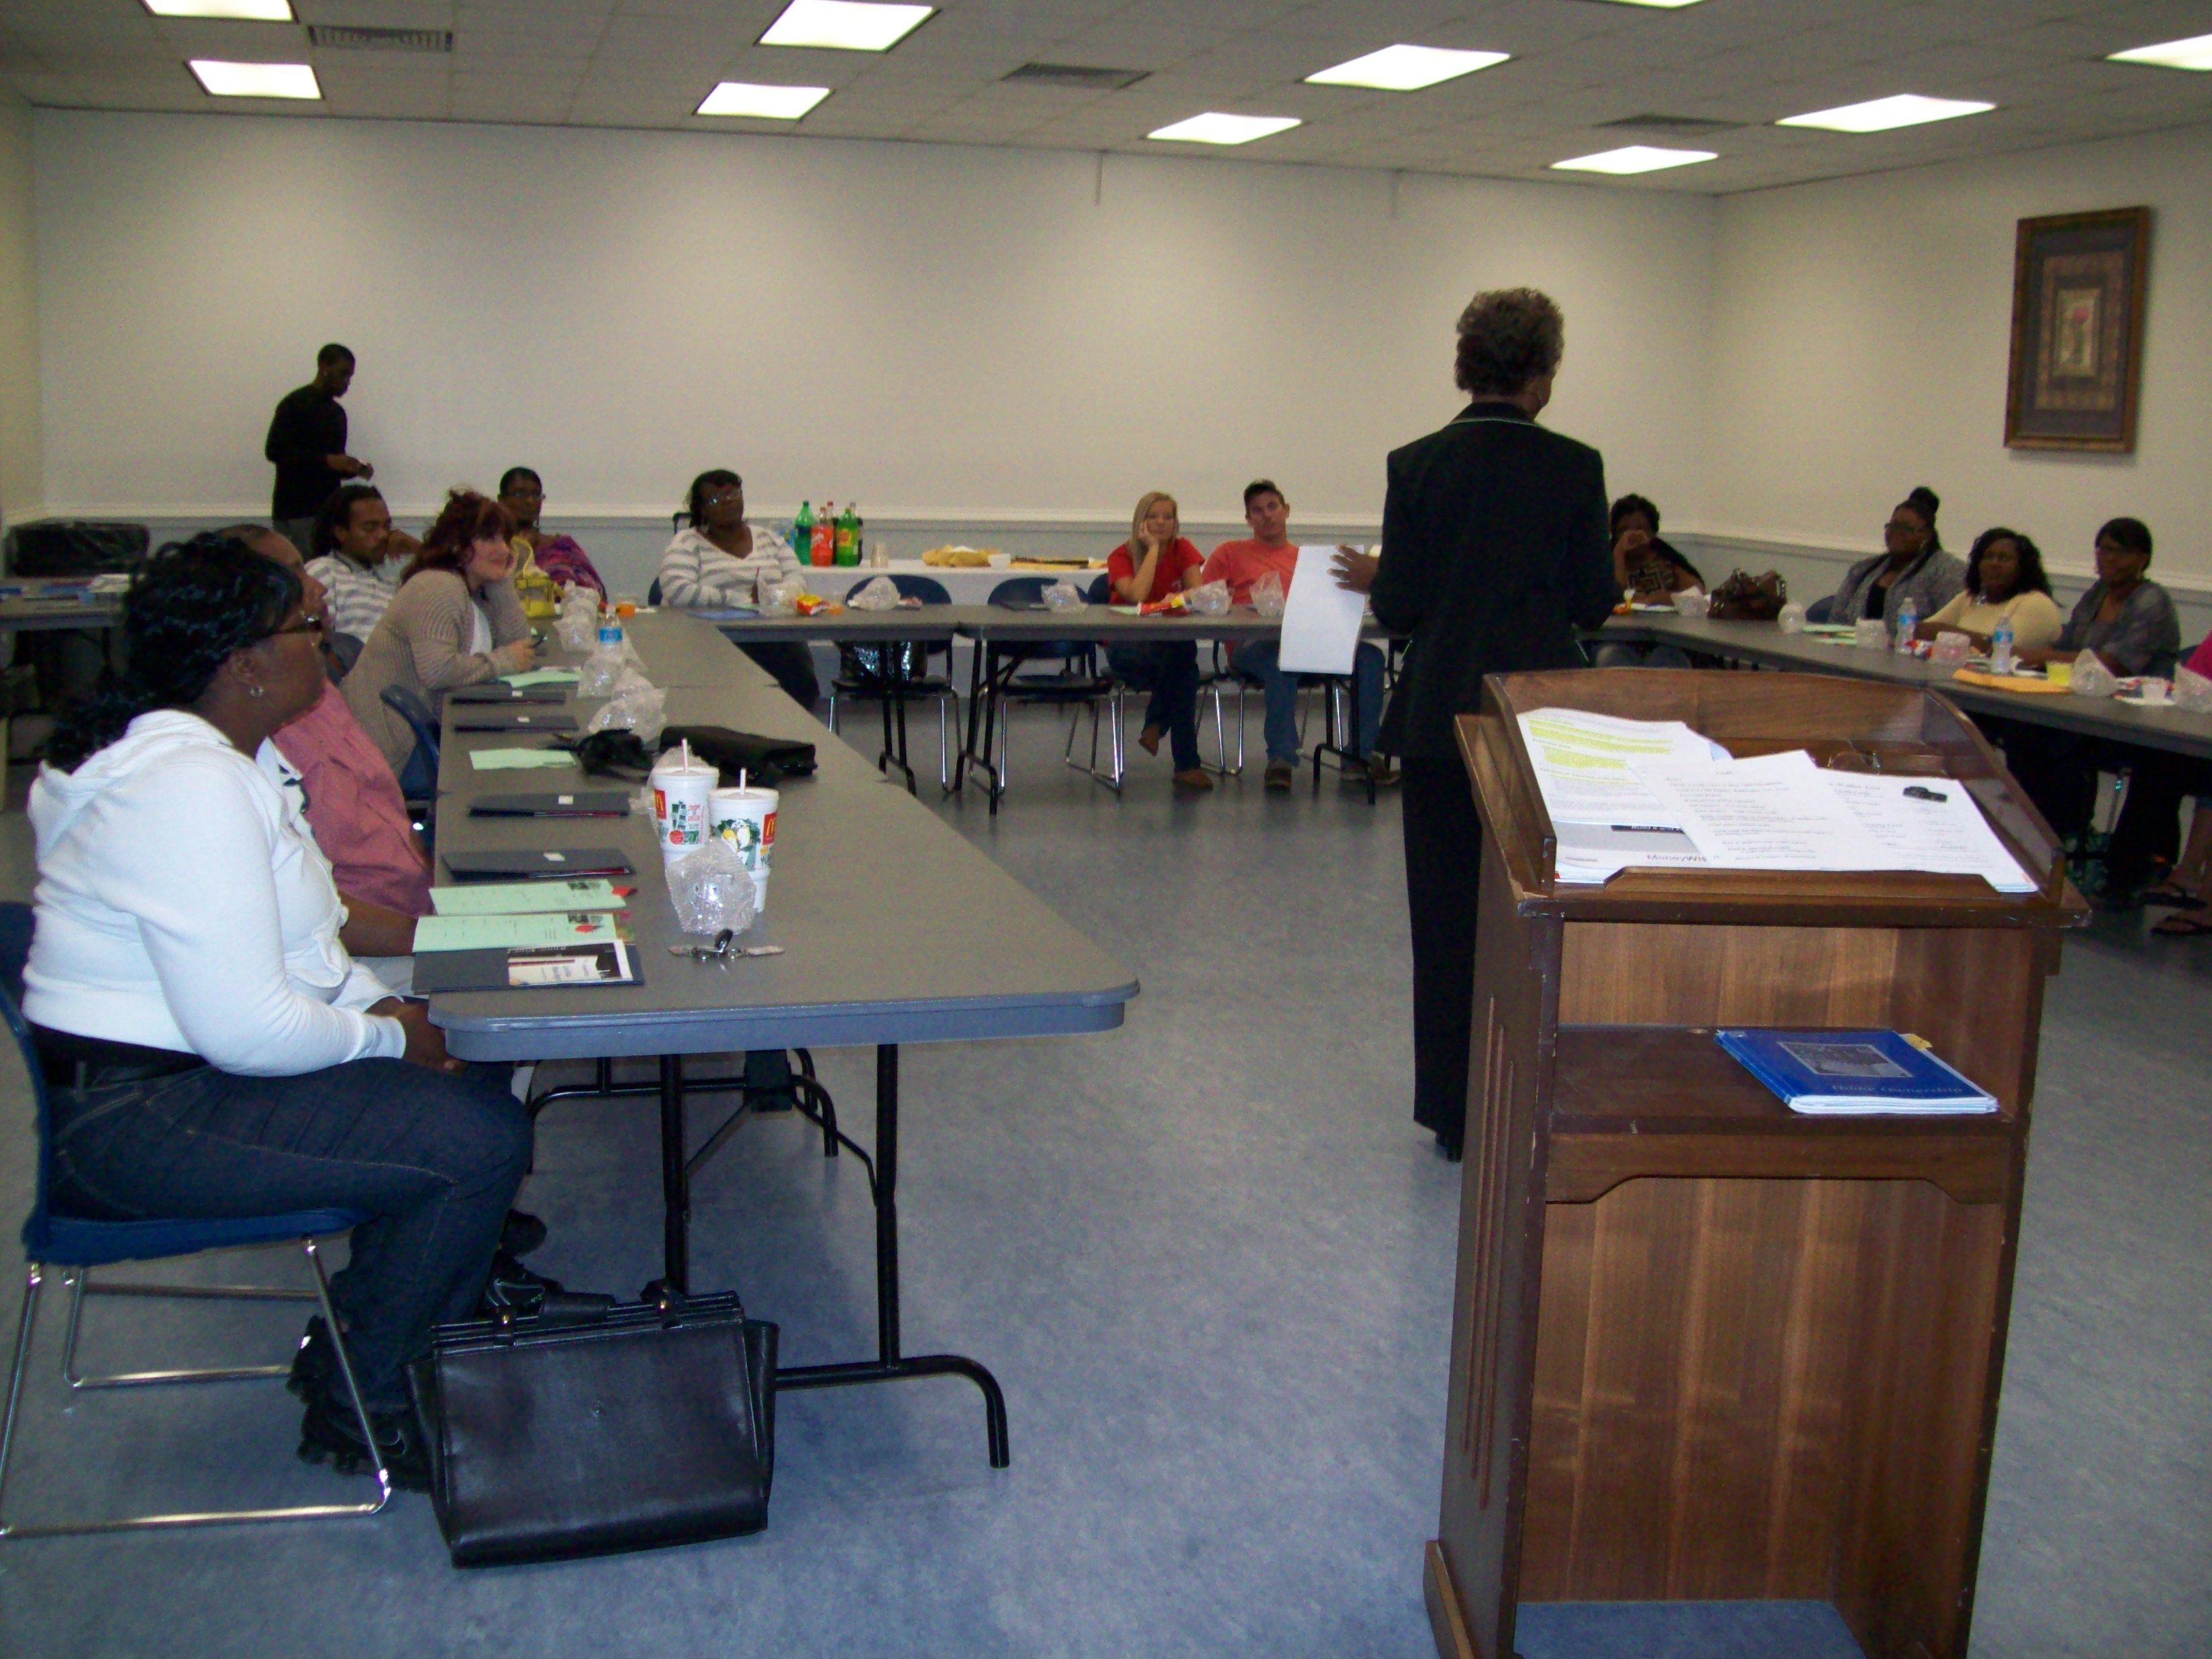 A photograph of approximately thirteen residents sitting in a meeting room at tables arranged in a u-shape. A counselor stands, with her back to the camera, at the open end of the table arrangement. Behind the counselor is a lectern with books and papers on it. 